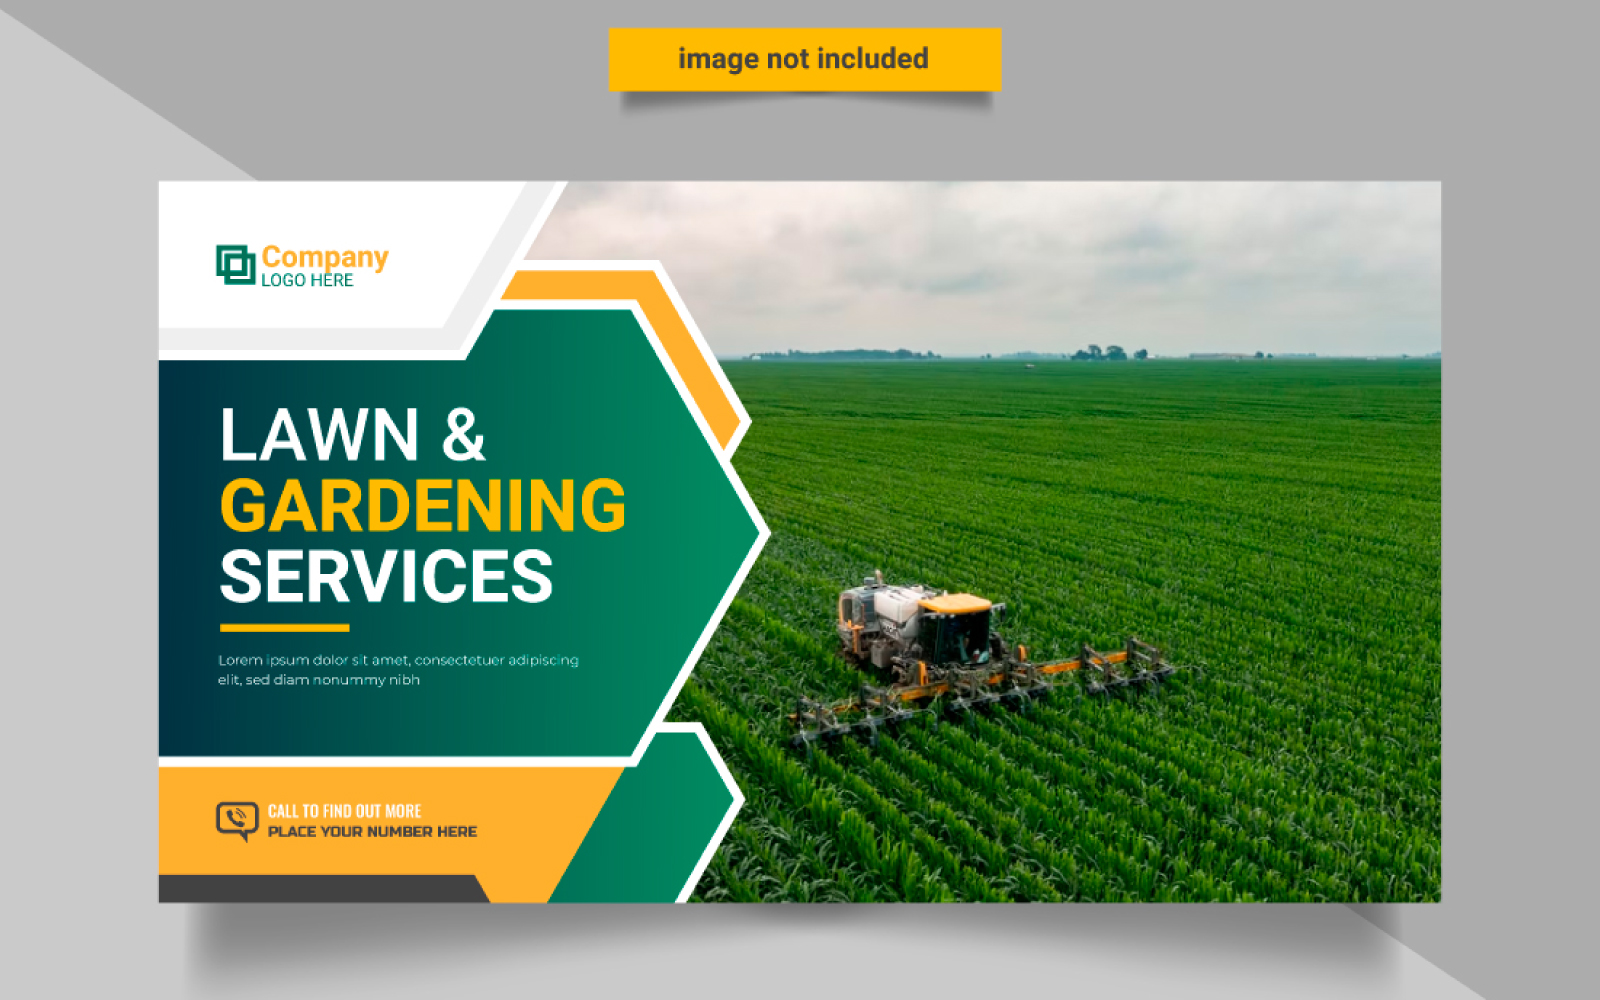 Agro farm and landscaping business web banner design Vector design